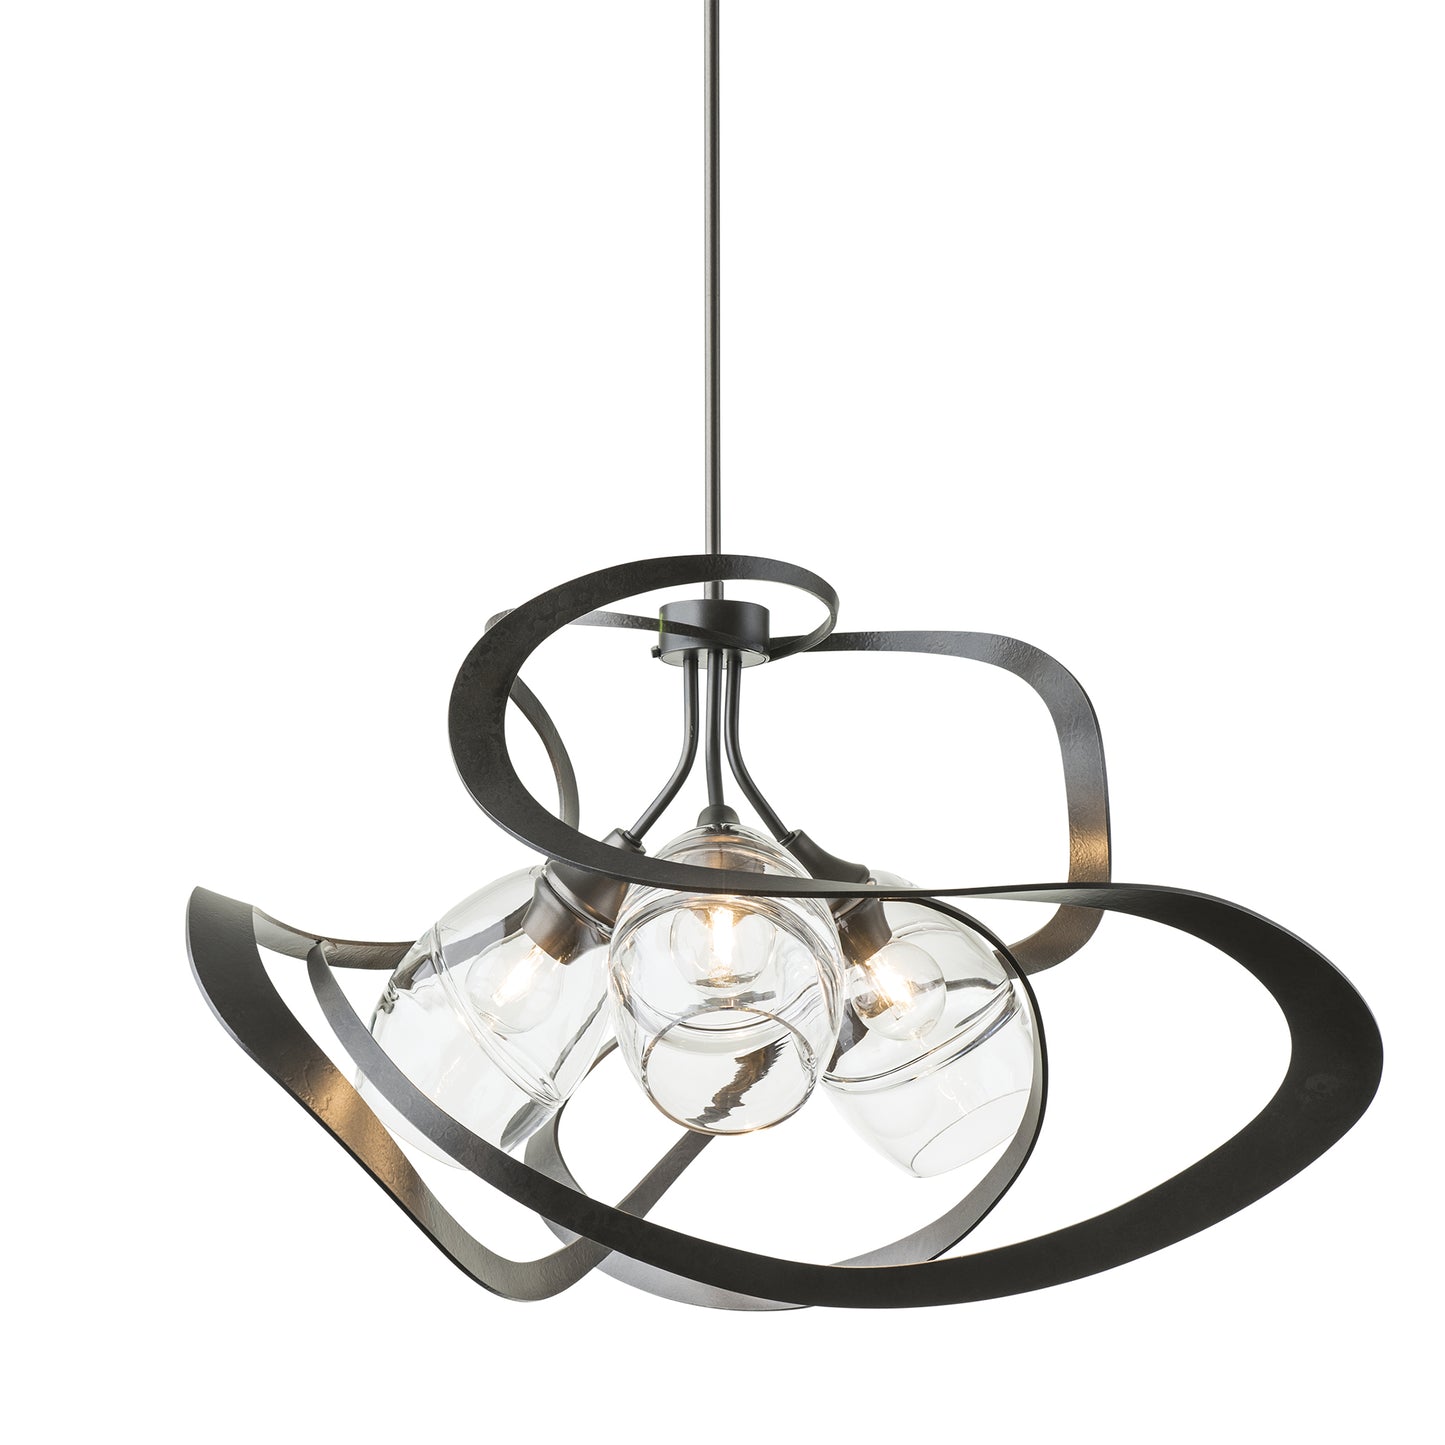 A handcrafted Nest Pendant light with a black metal frame and glass shades by Hubbardton Forge lighting.